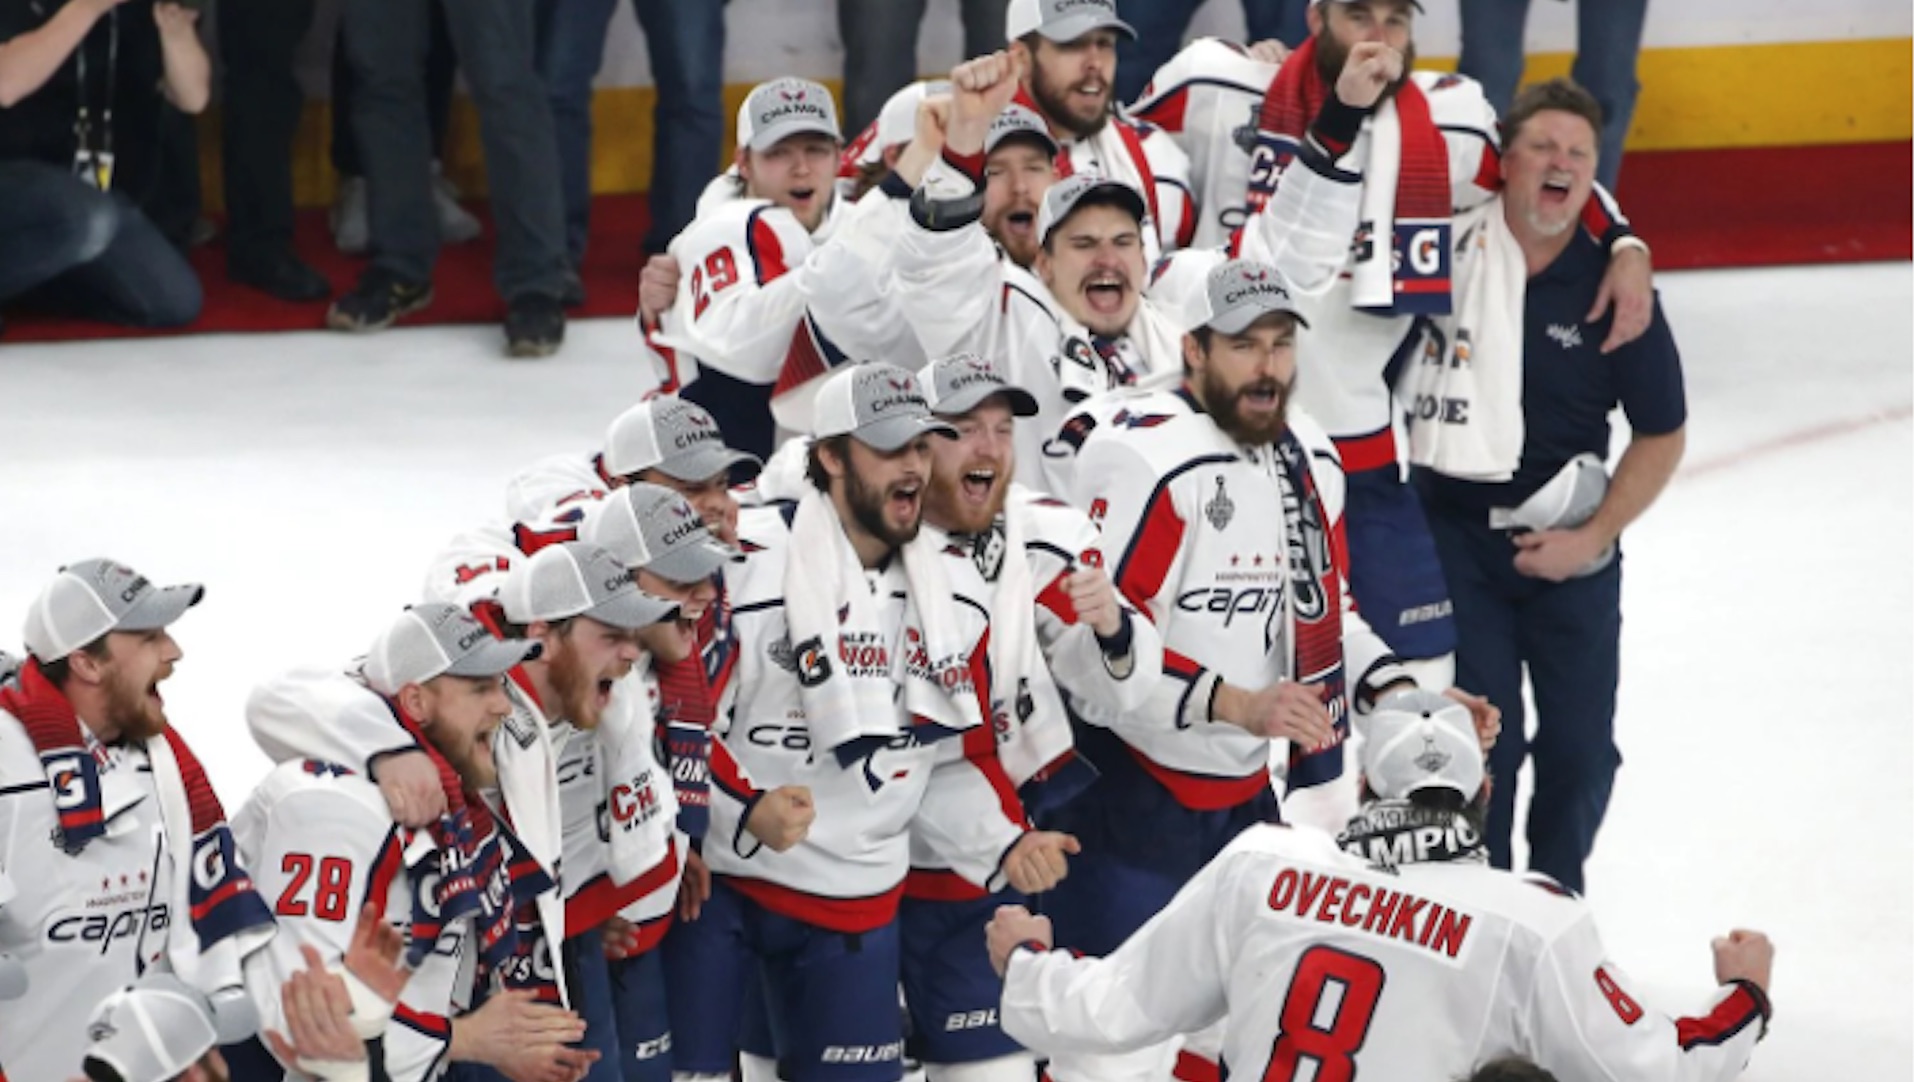 T.J. Oshie Washington Capitals 2018 Stanley Cup Champions